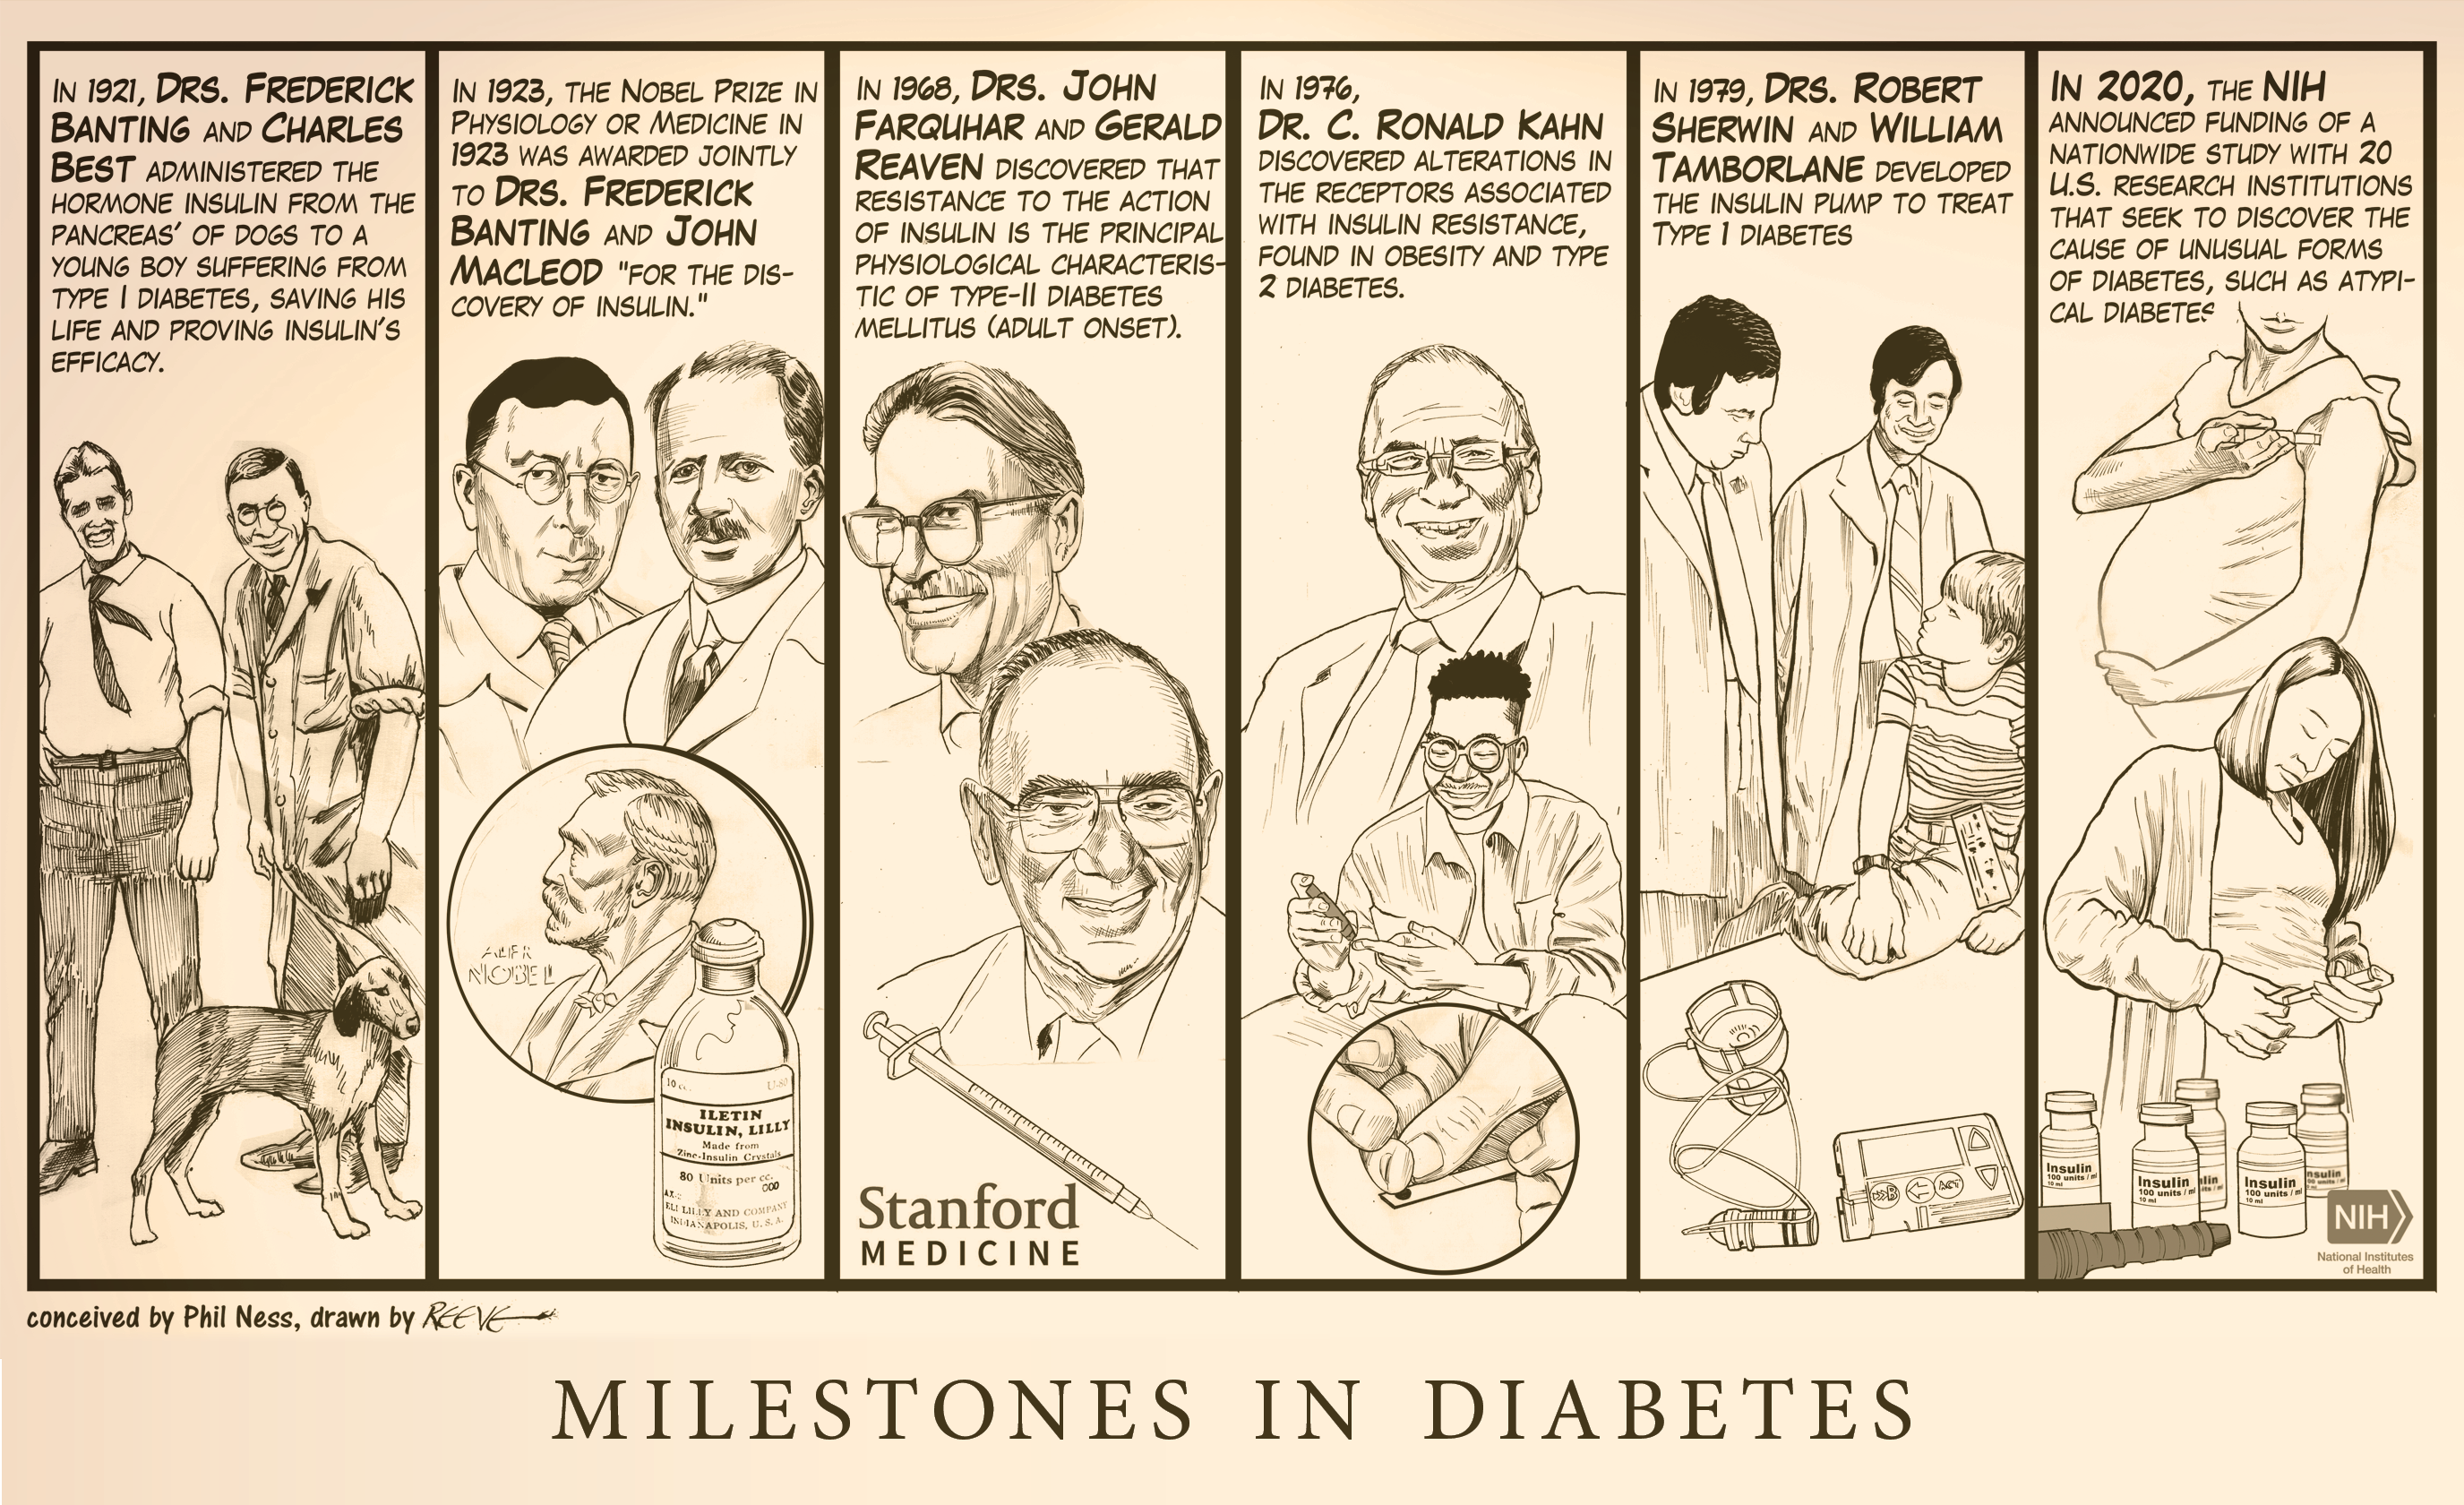 Cartoon: Milestones in Diabetes, Conceived by Phil Ness, drawn by Reeve, 2022.